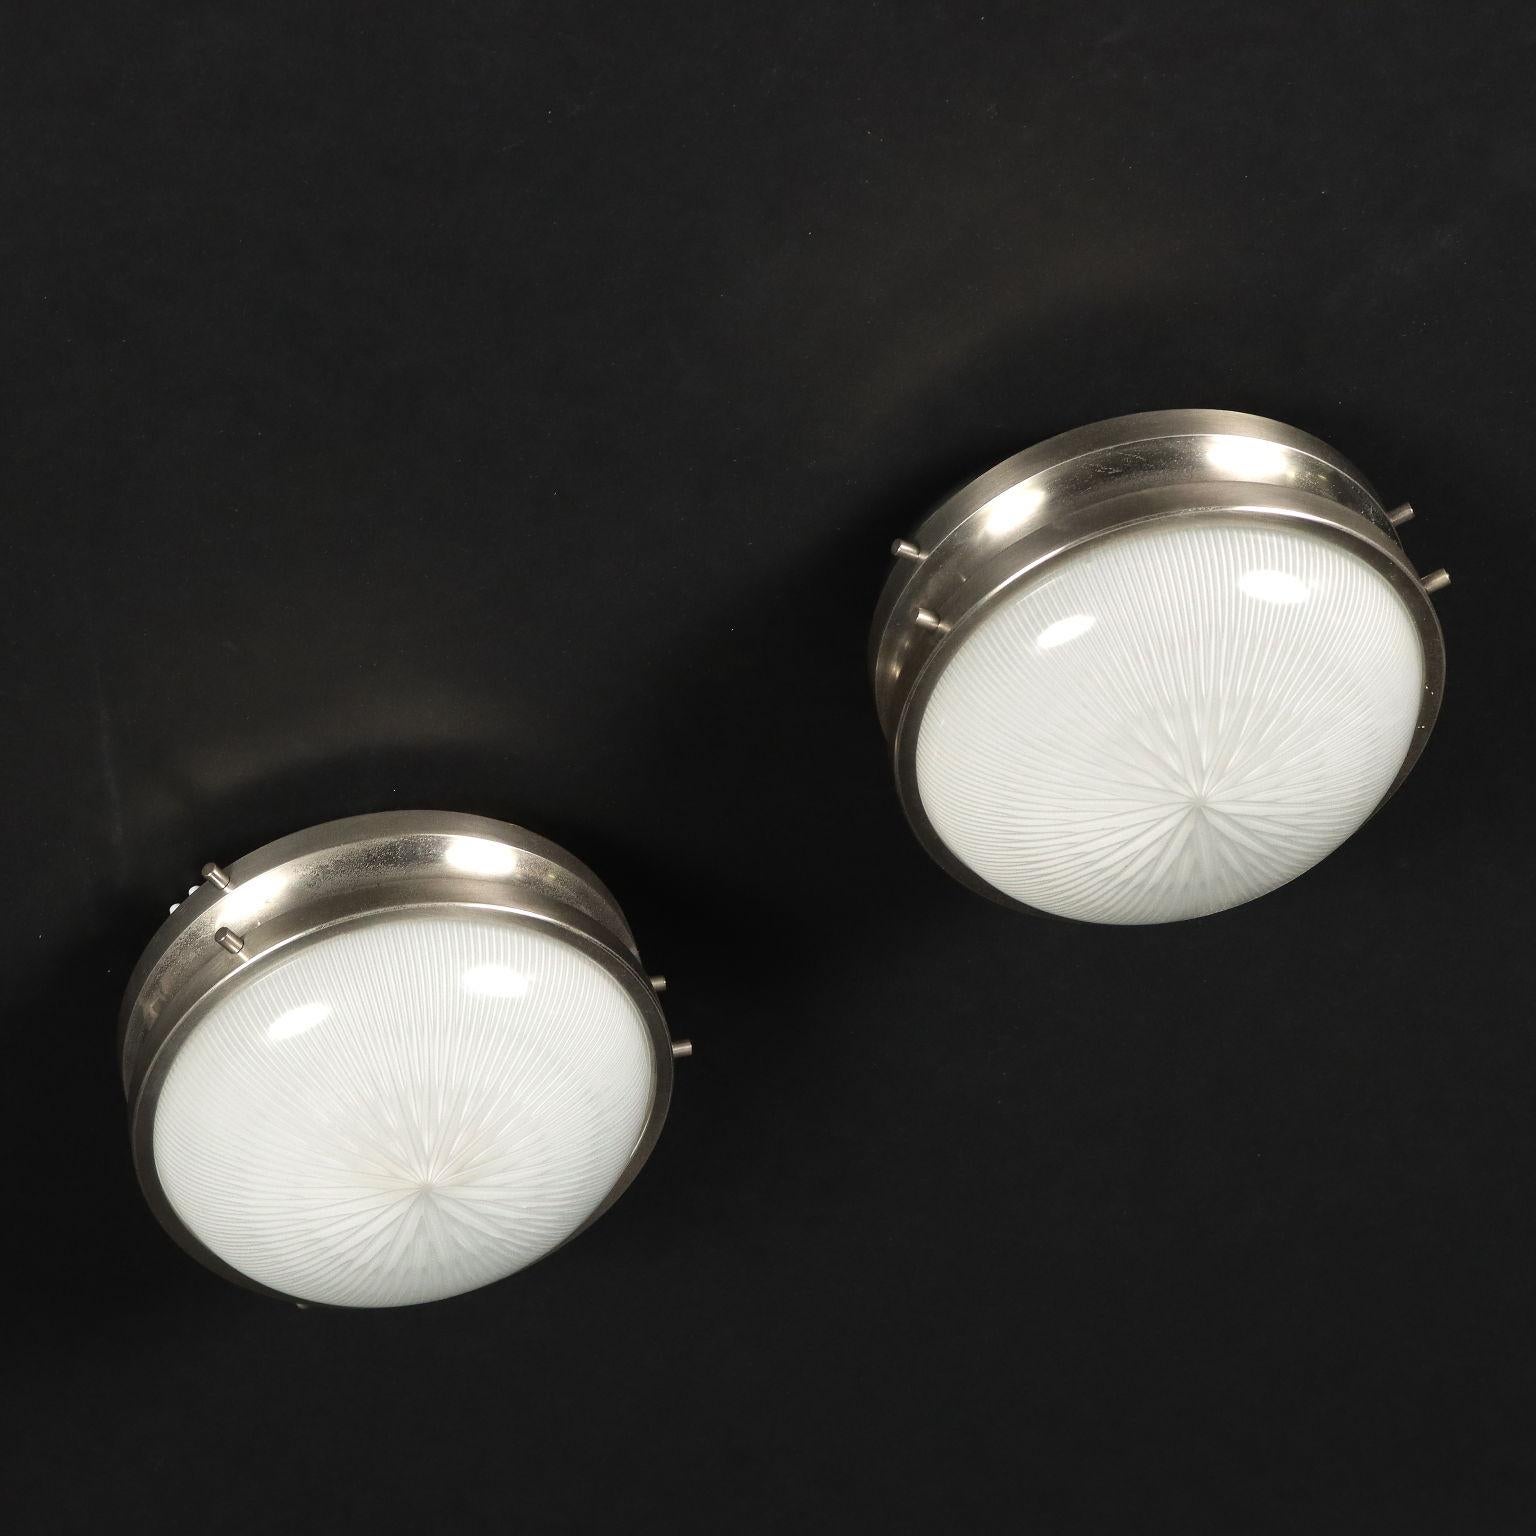 Pair of wall/ceiling lamps; metal and aluminum, glass.